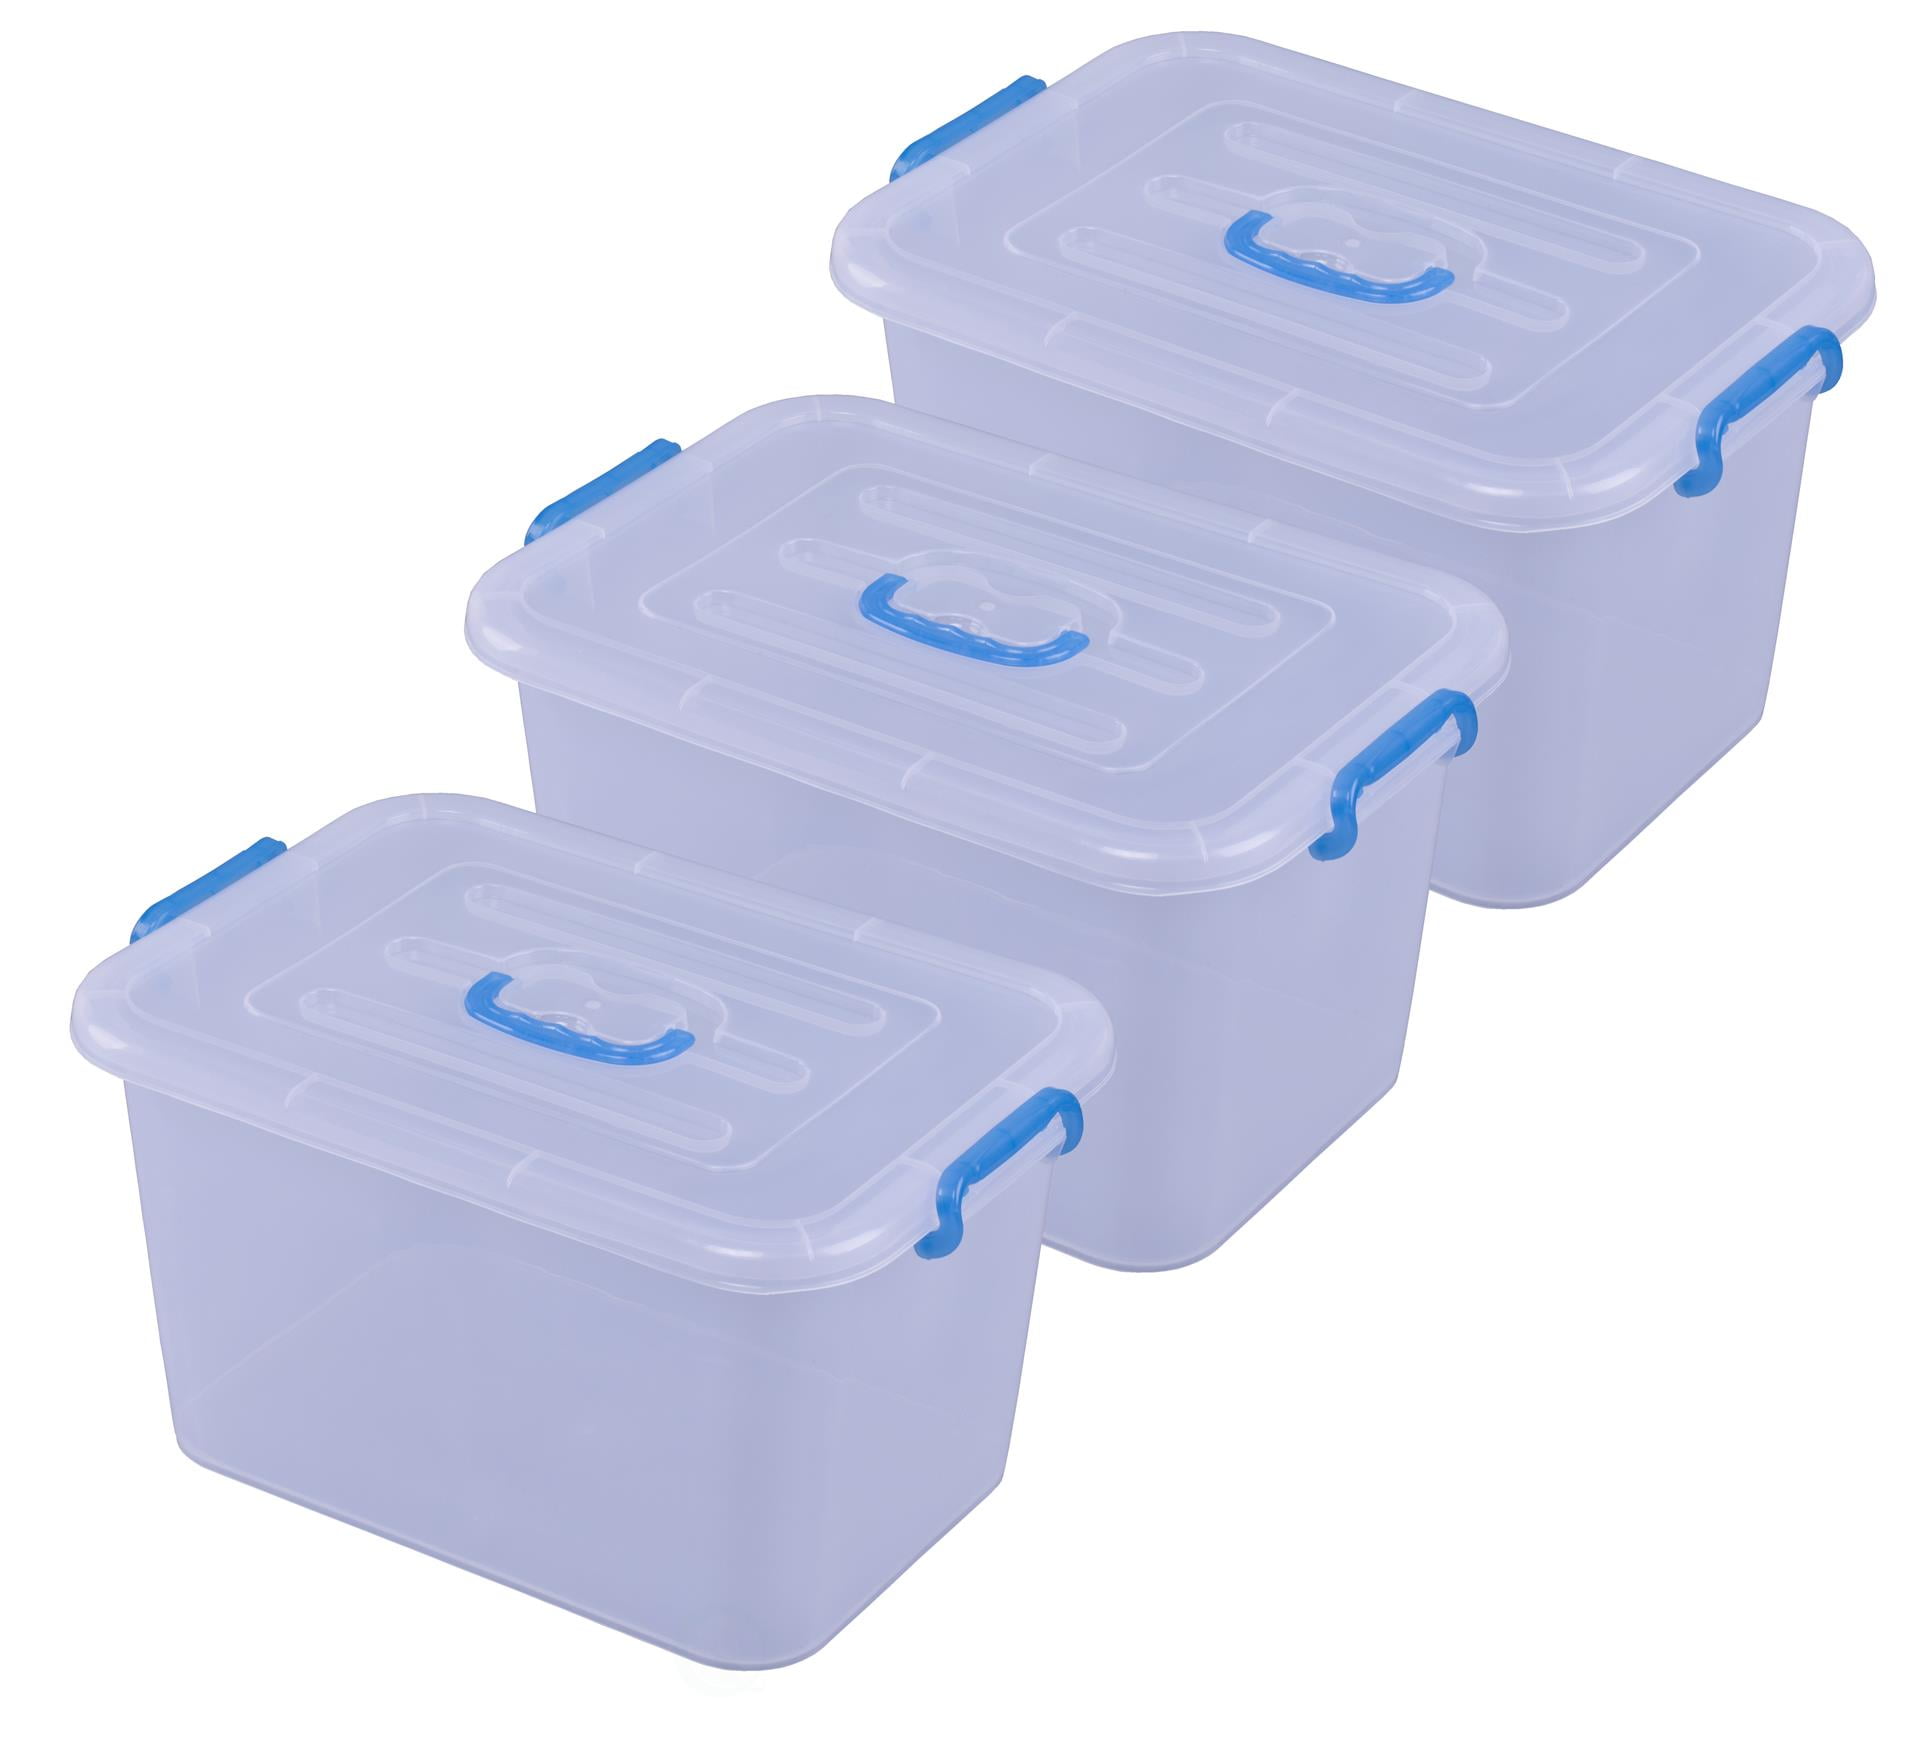 Large Clear Storage Container With Lid and Handles, Set of 3 